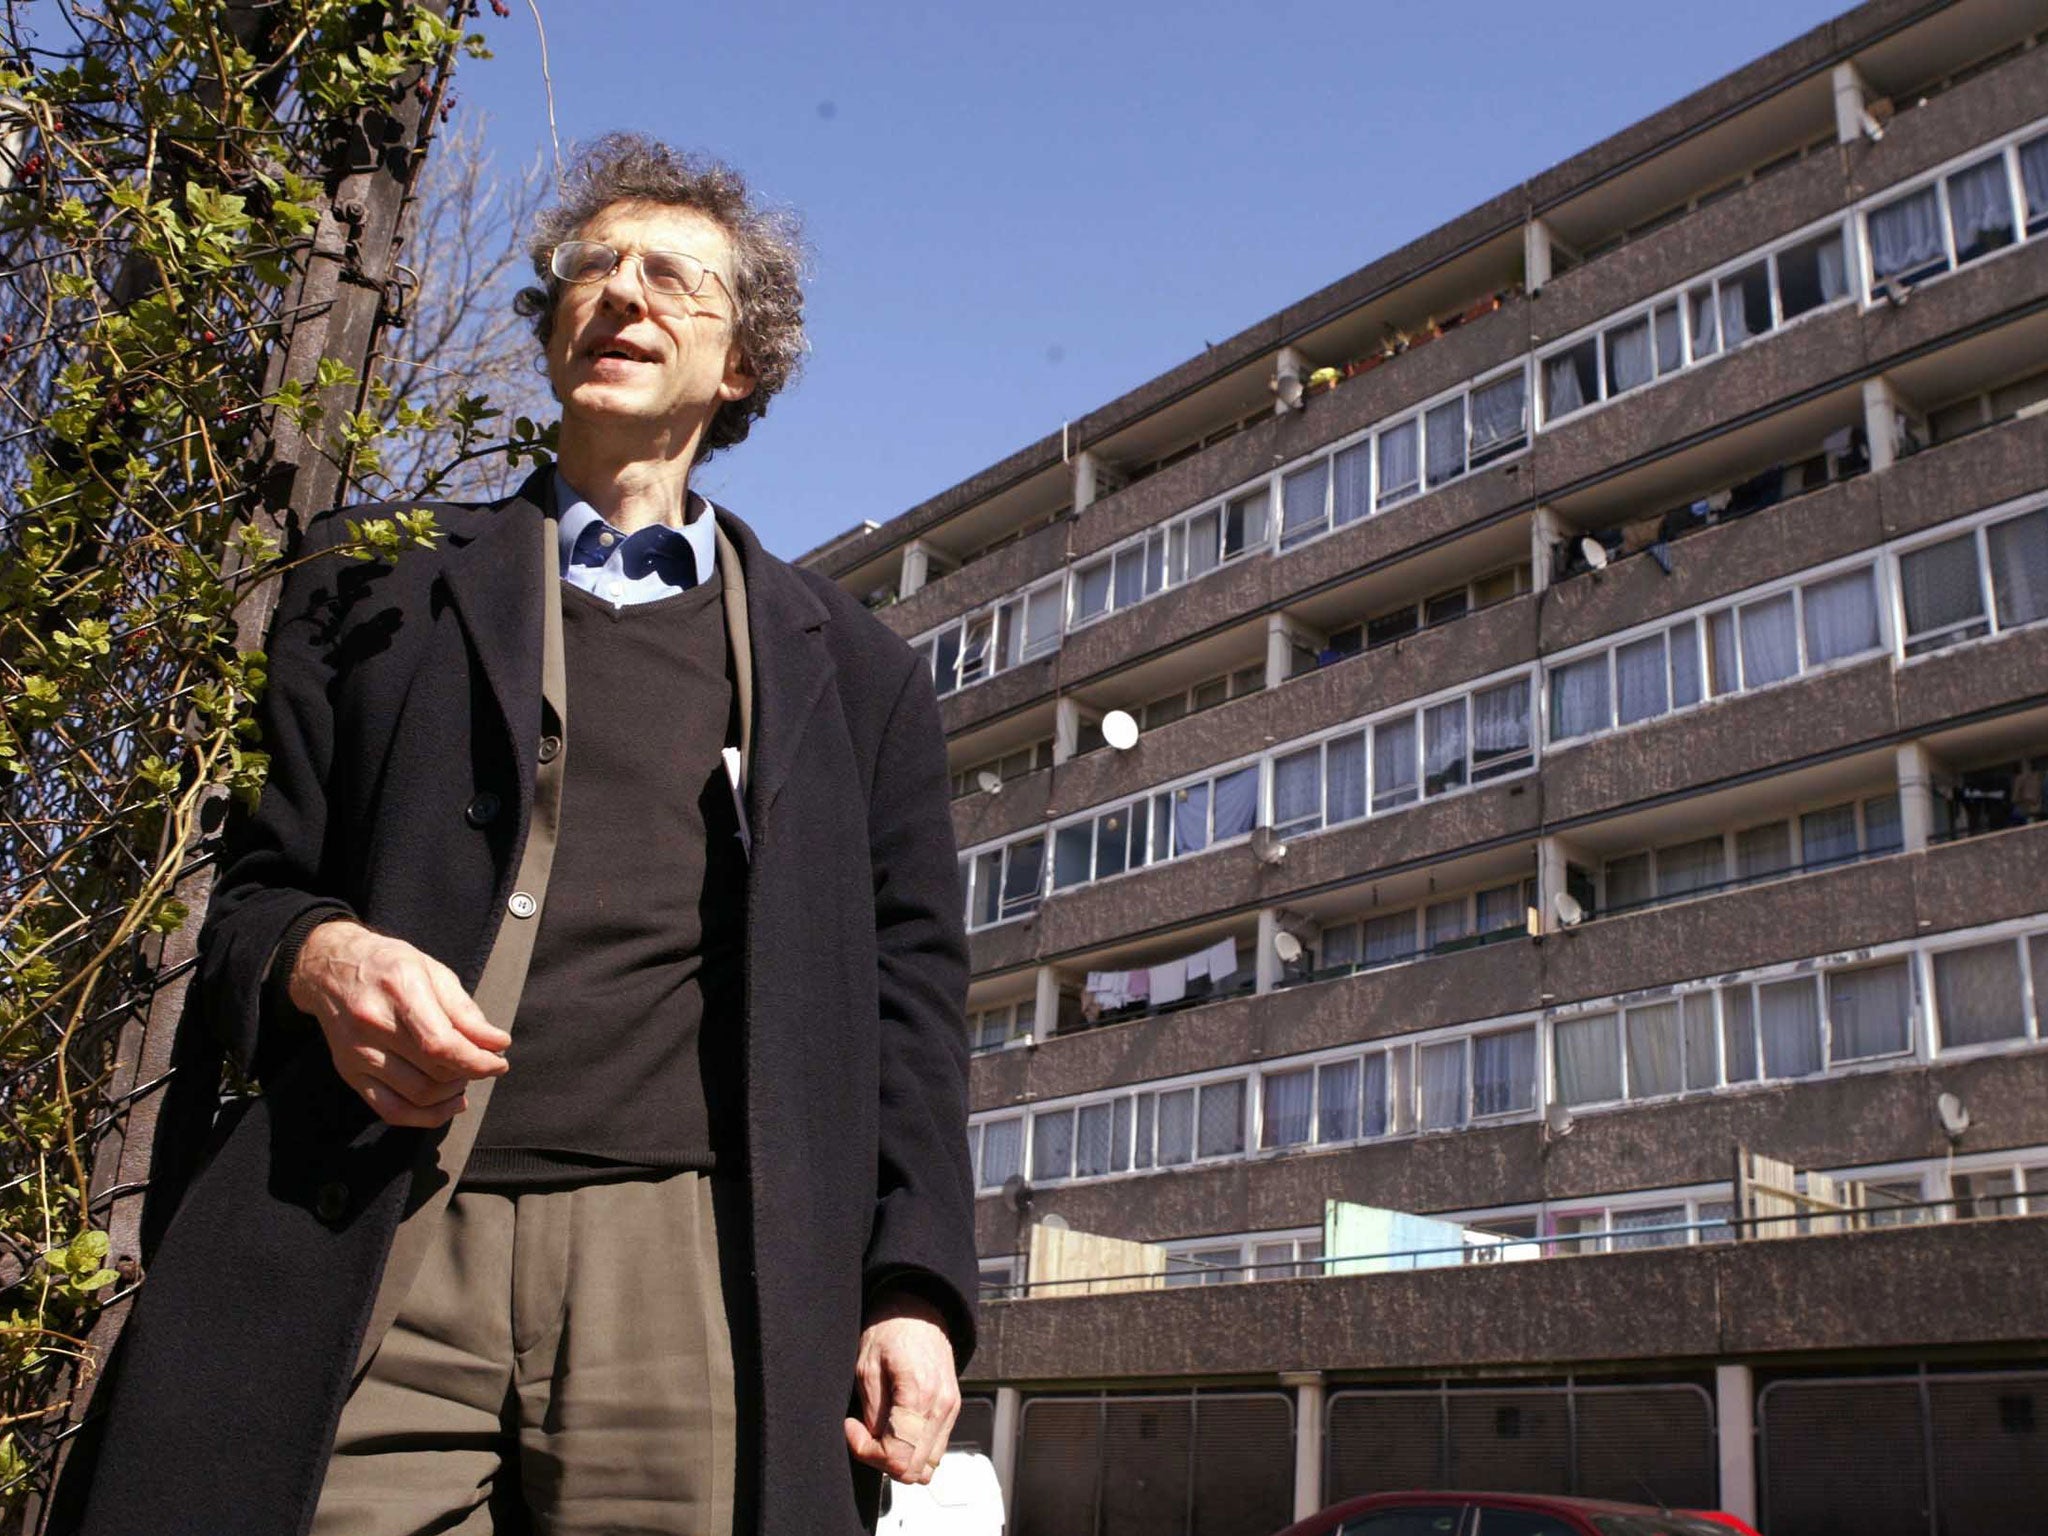 Weather forecaster and brother of Jeremy, Piers Corbyn